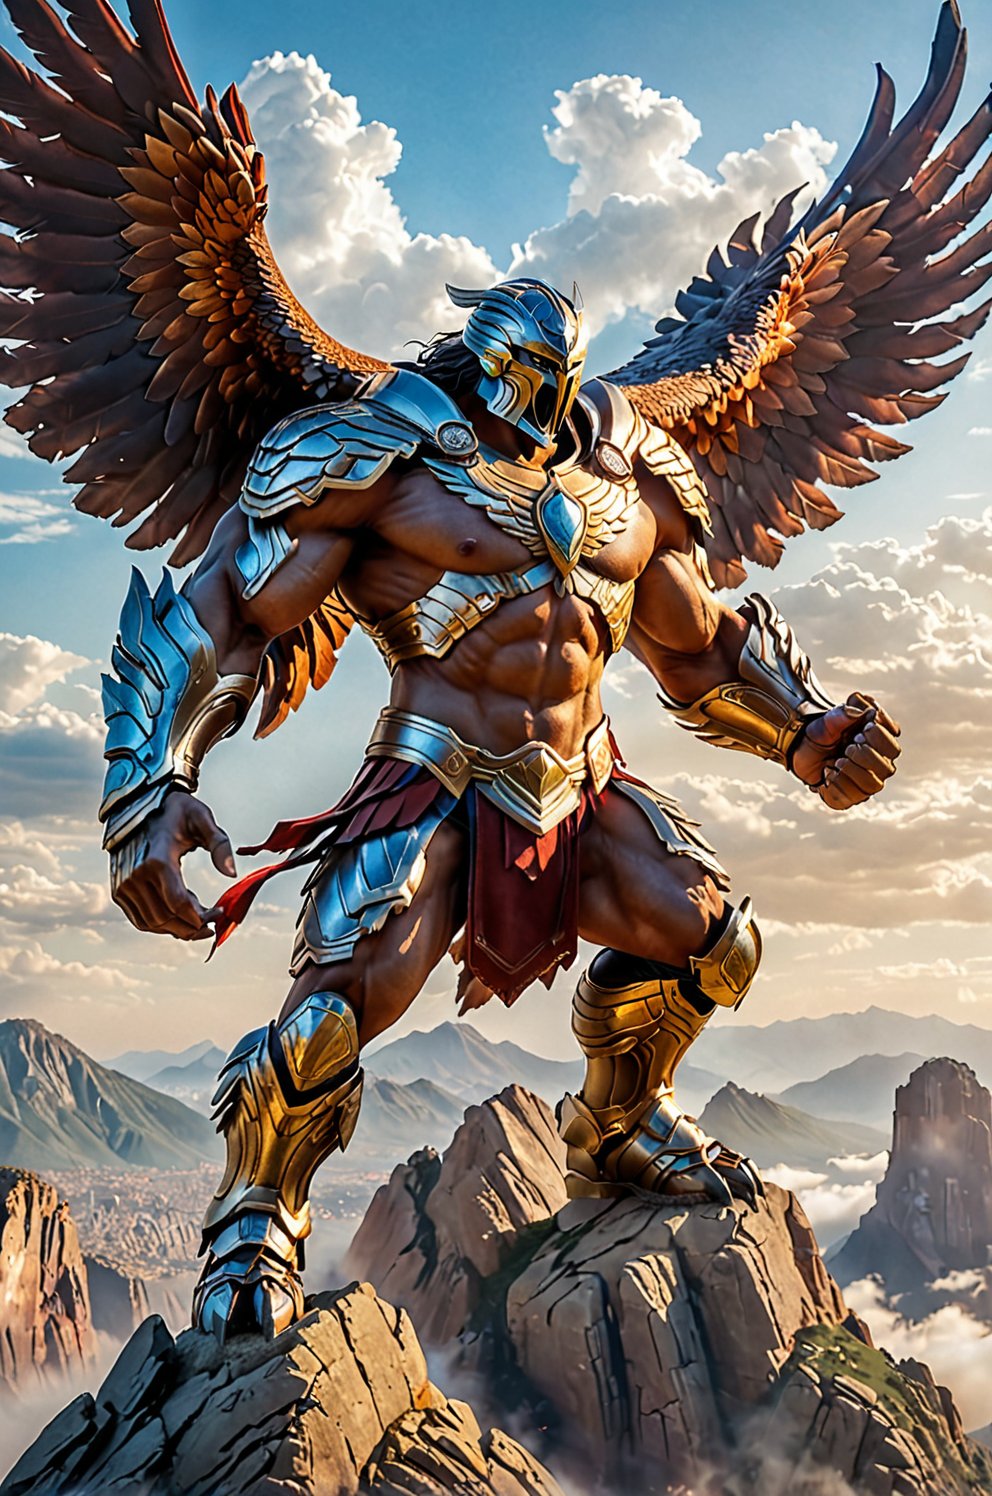 picture a titan the size of a mountain in a fighting pose ready to battle against a giant eagle